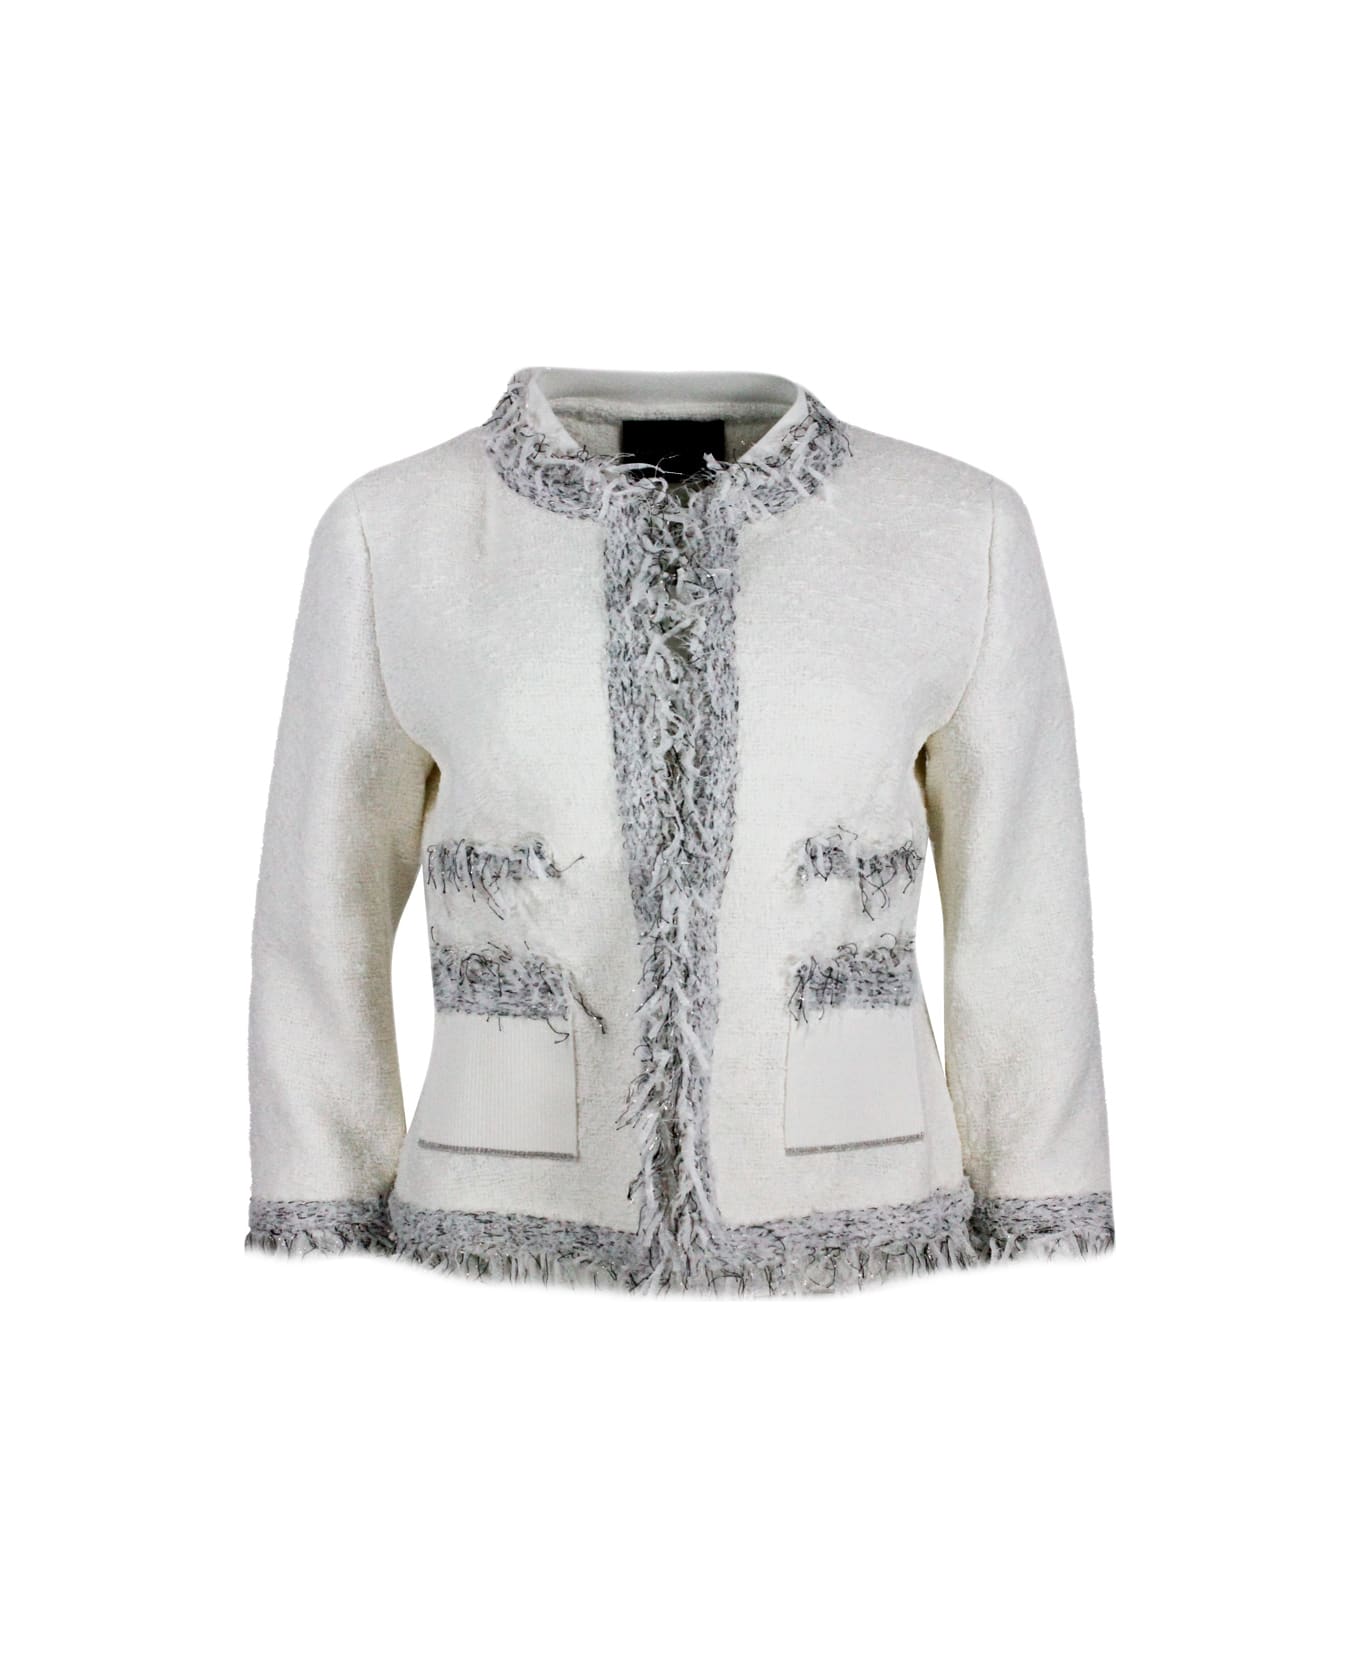 Lorena Antoniazzi Chanel-style Jacket With Long Sleeves And Mandarin Collar In Worked Cotton With Ribbon Applications On The Edges - cream